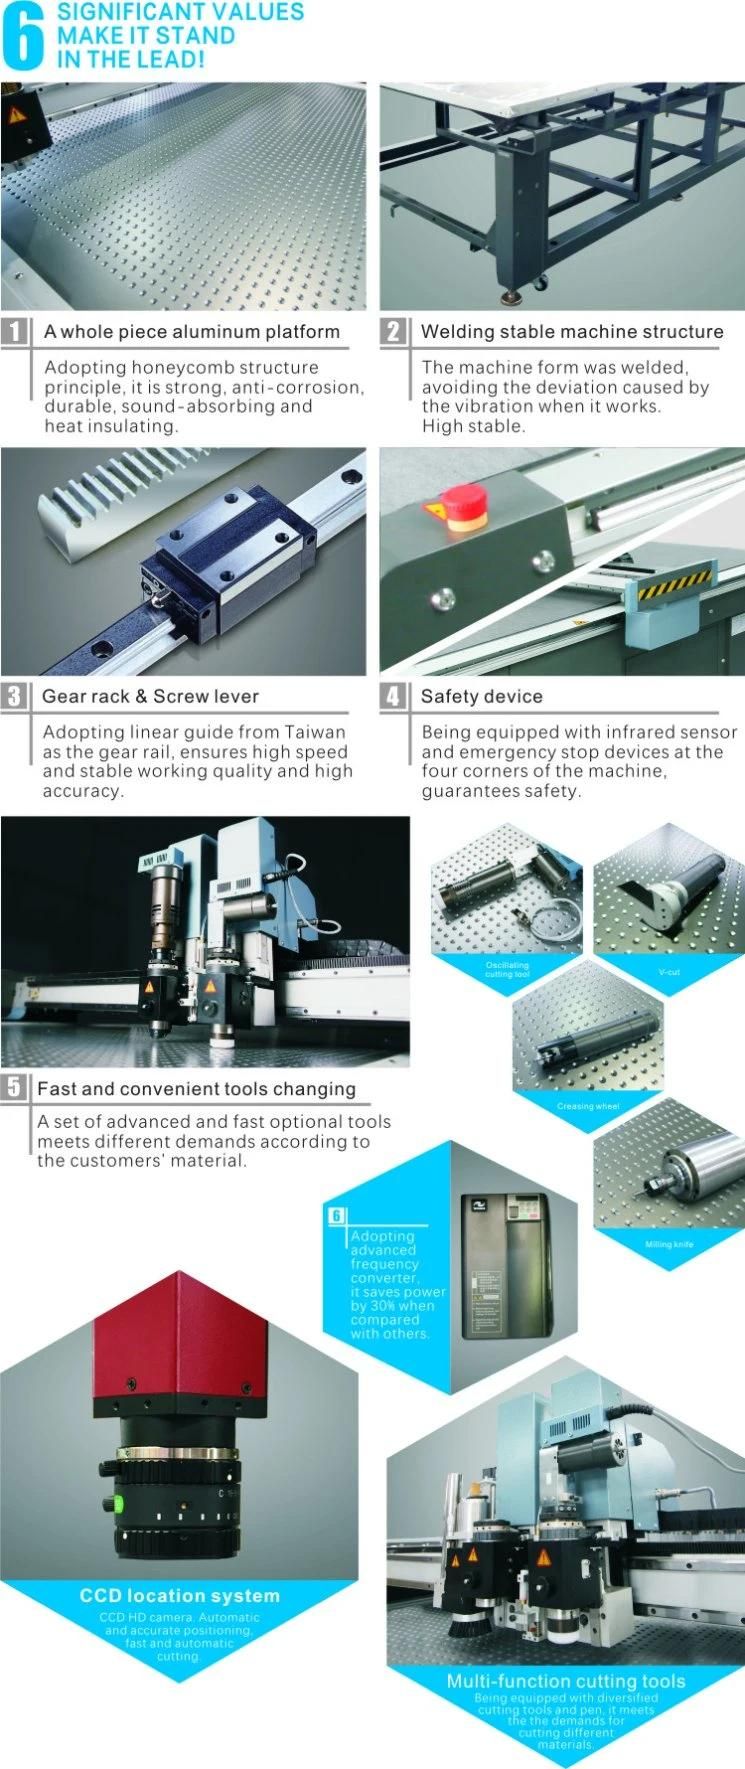 Ruizhou Dieless Cutter and Dieless Cutting Machine with Ce ISO